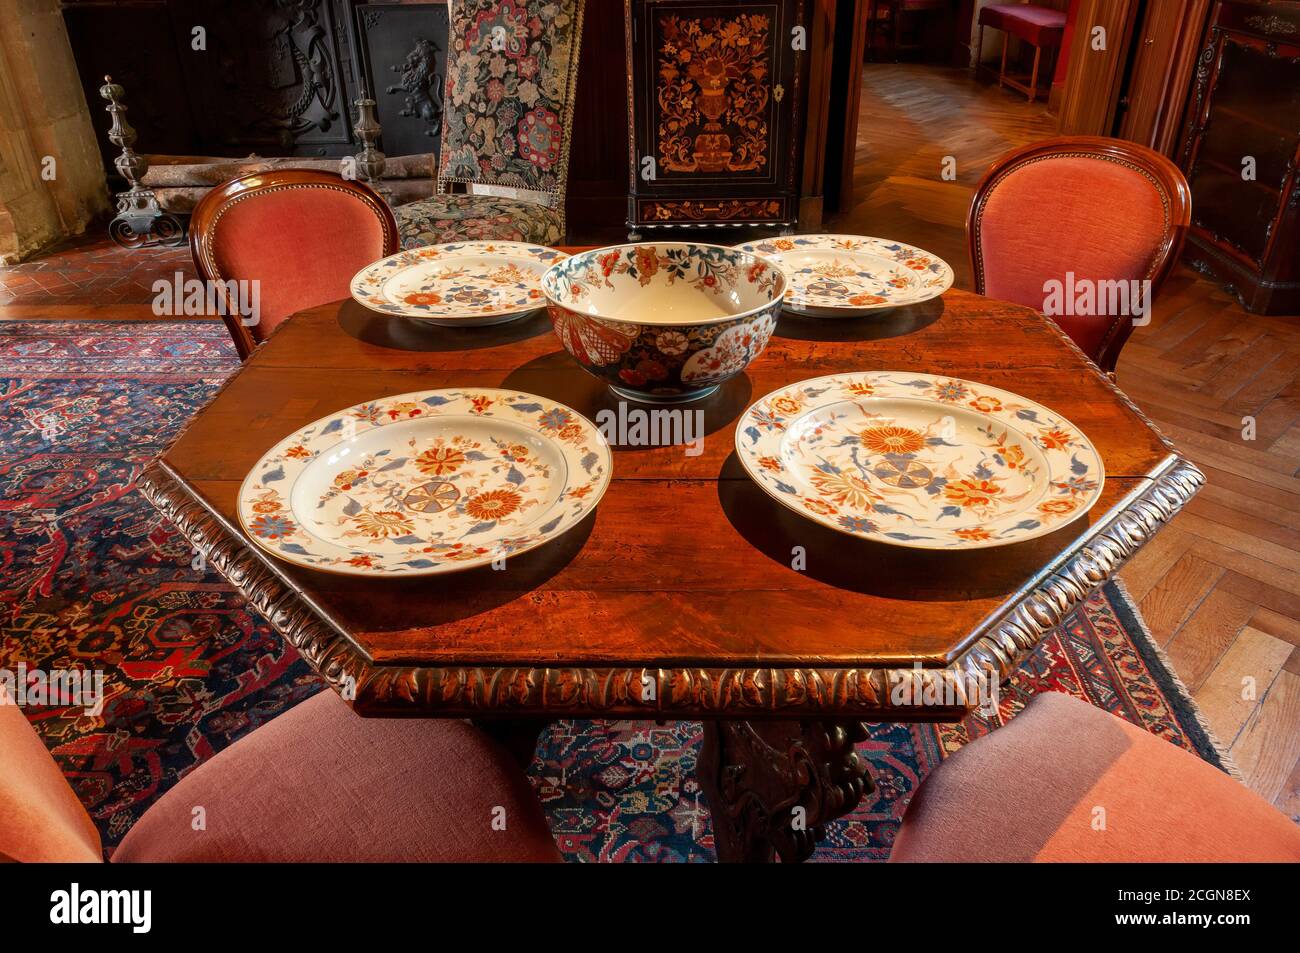 Azay le Rideau, France - October 30, 2013: The historical renaissance Biencourt salon living room with a table set with china of the period. Stock Photo